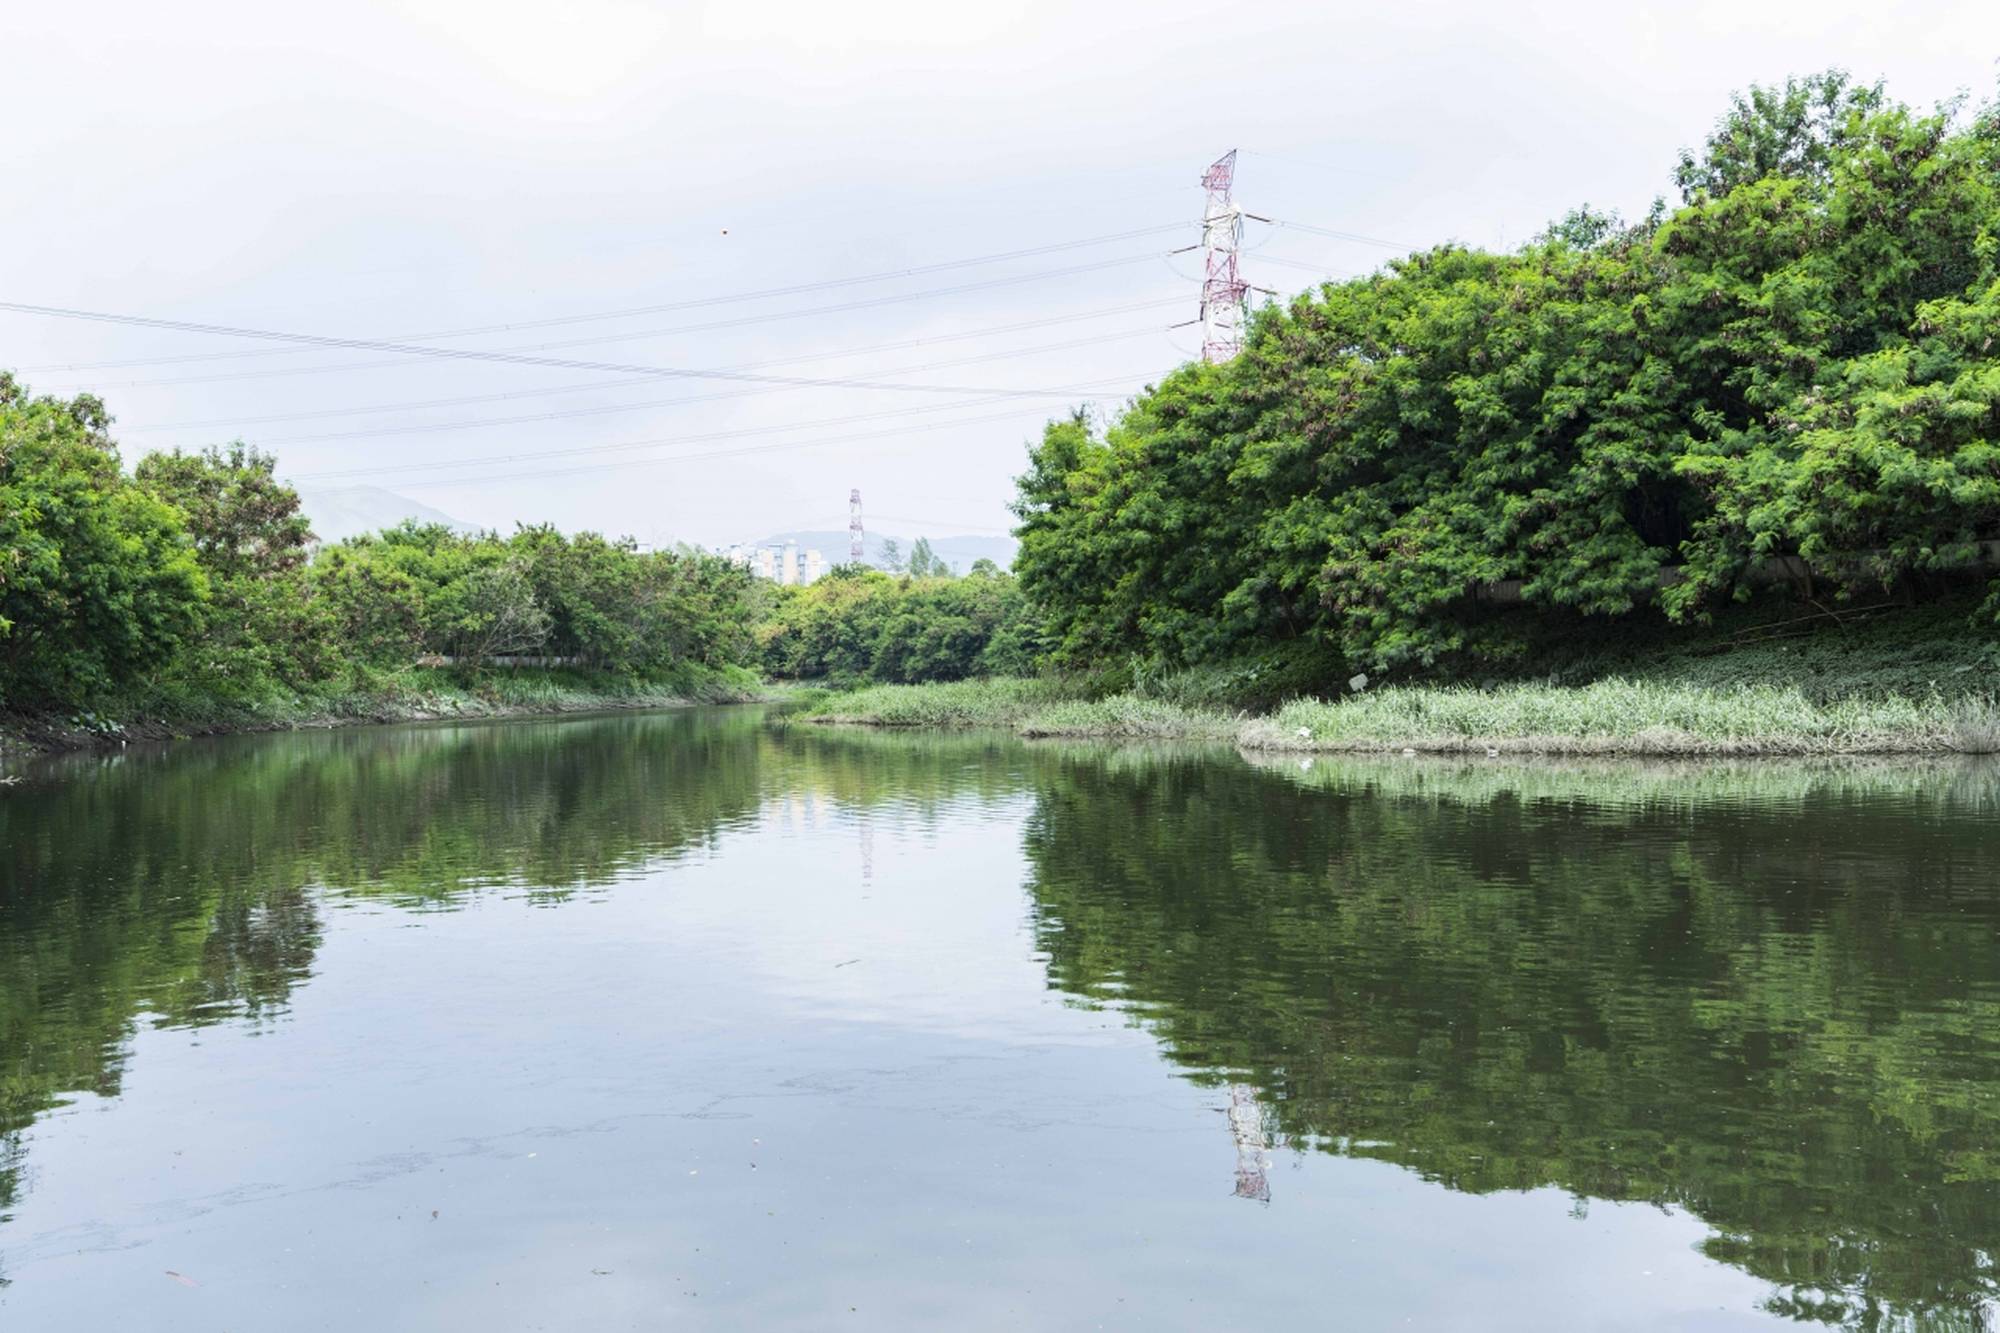 The shallow pond of Yuen Long Bypass Floodway.